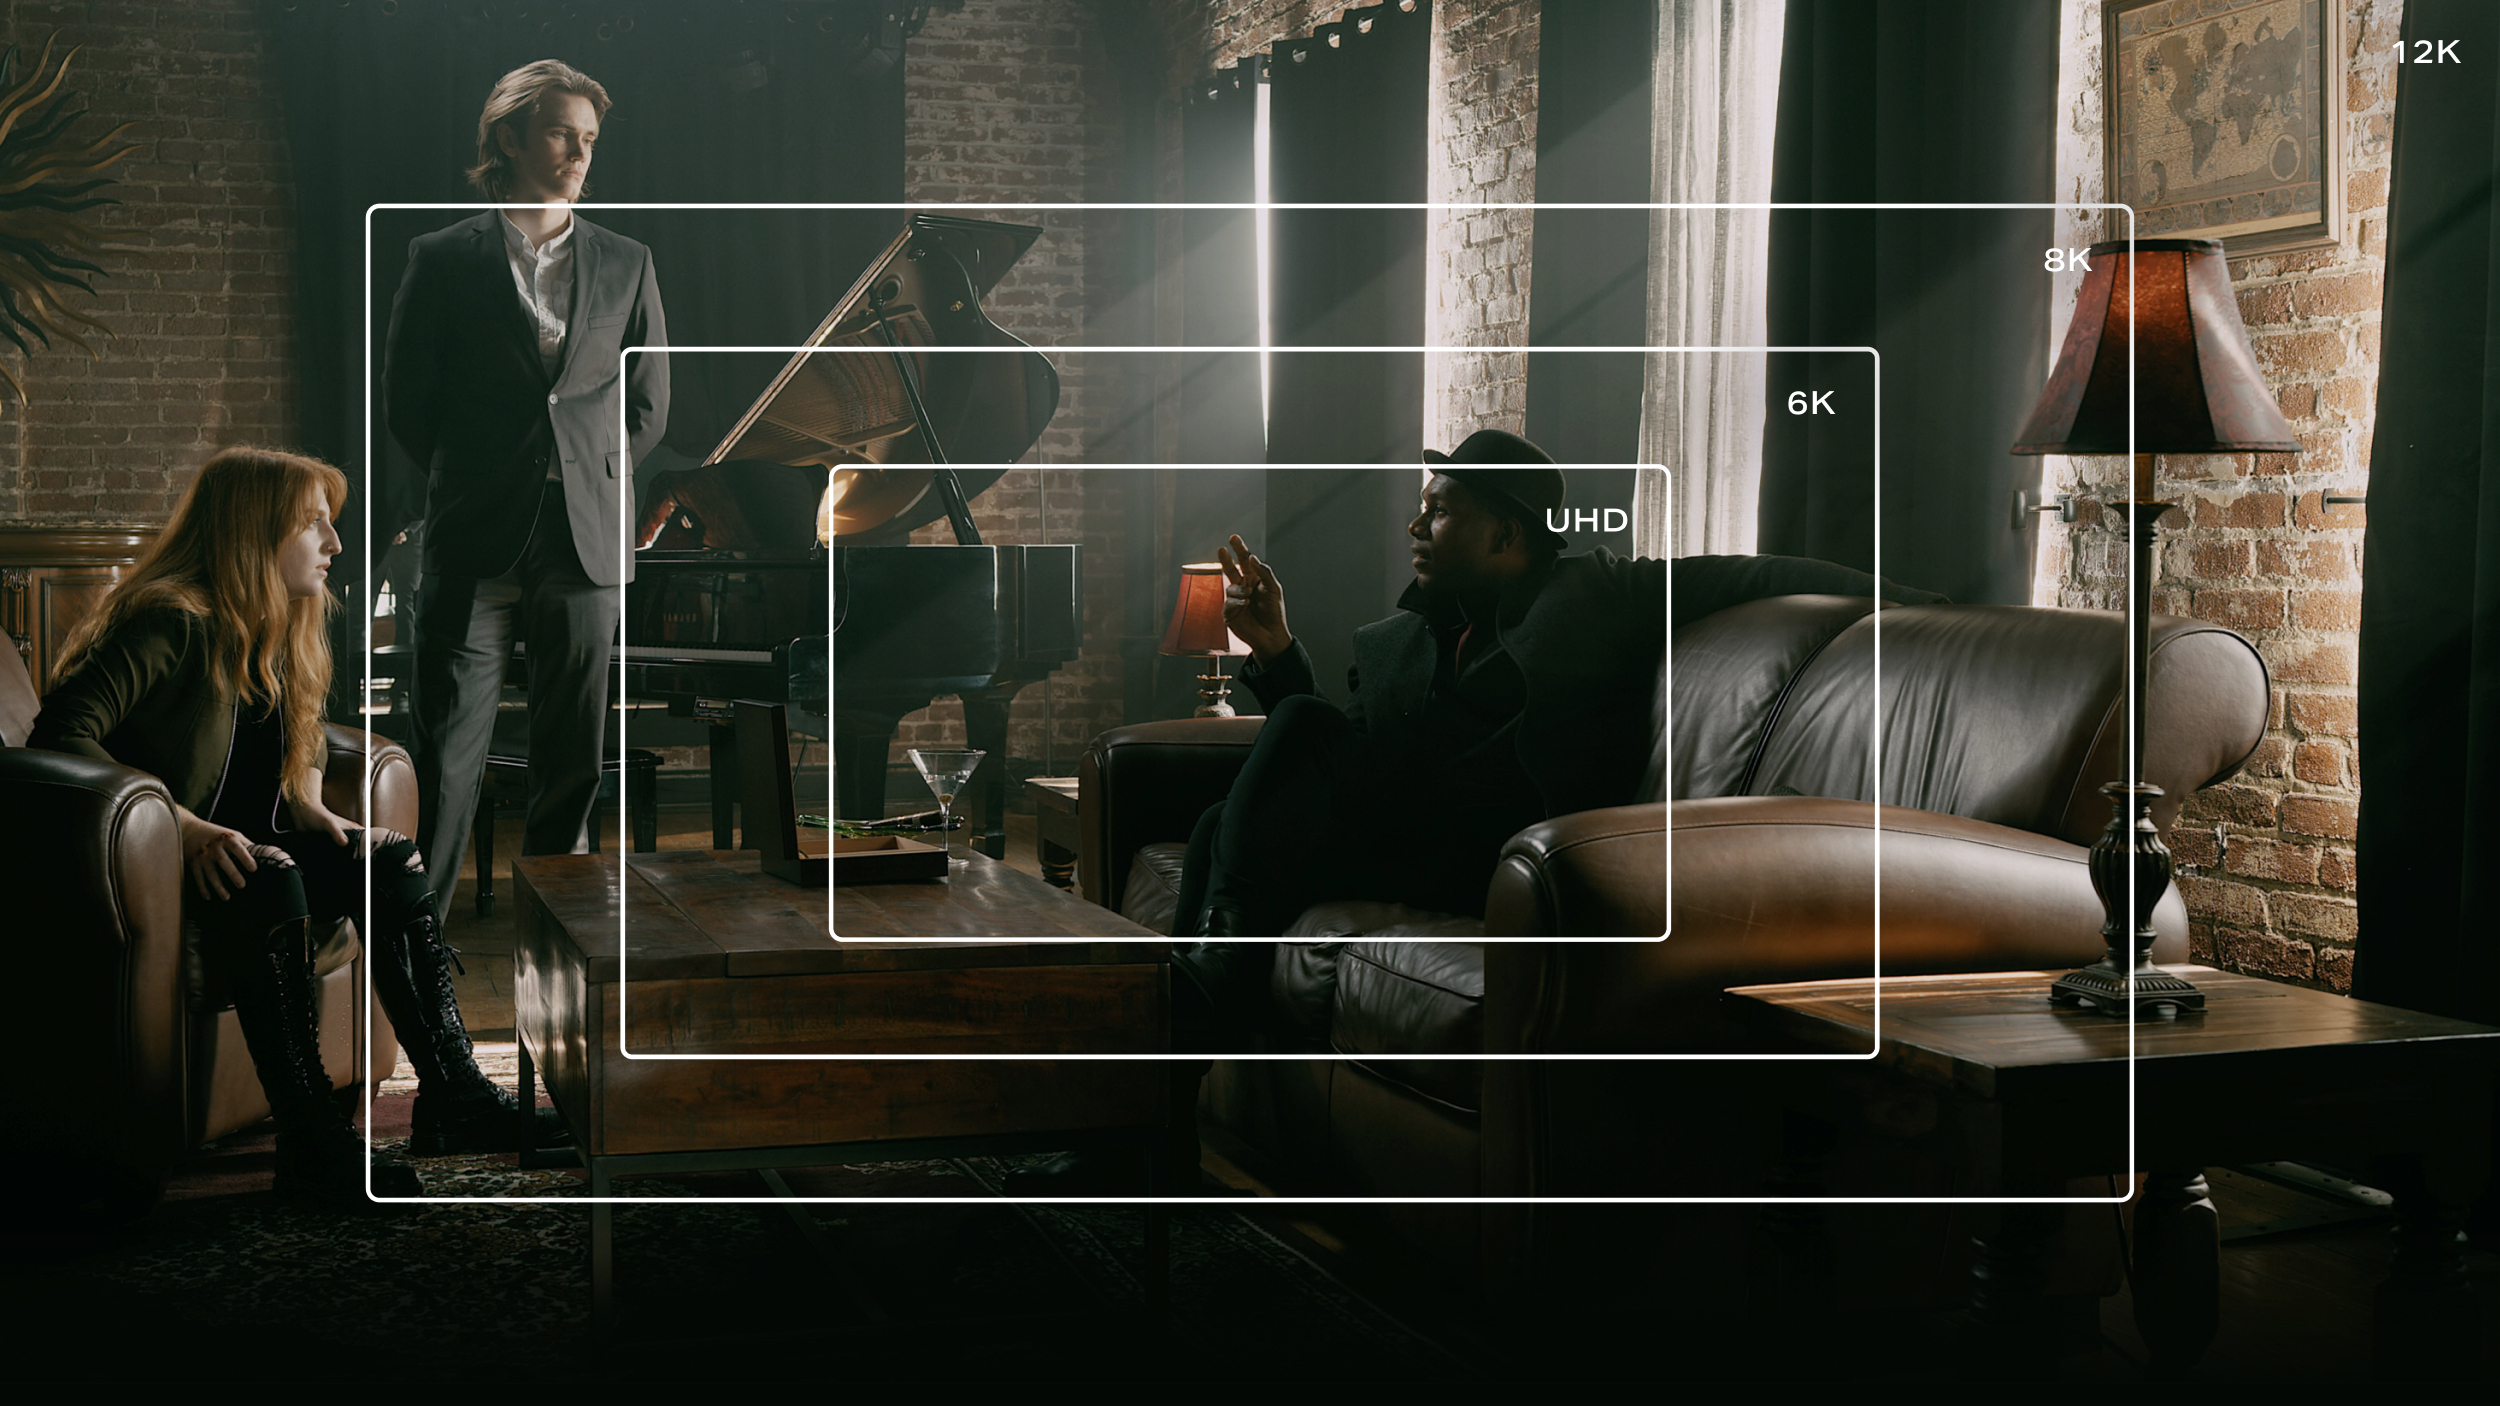 12K and Beyond: Do Filmmakers Really Need Higher Resolutions?